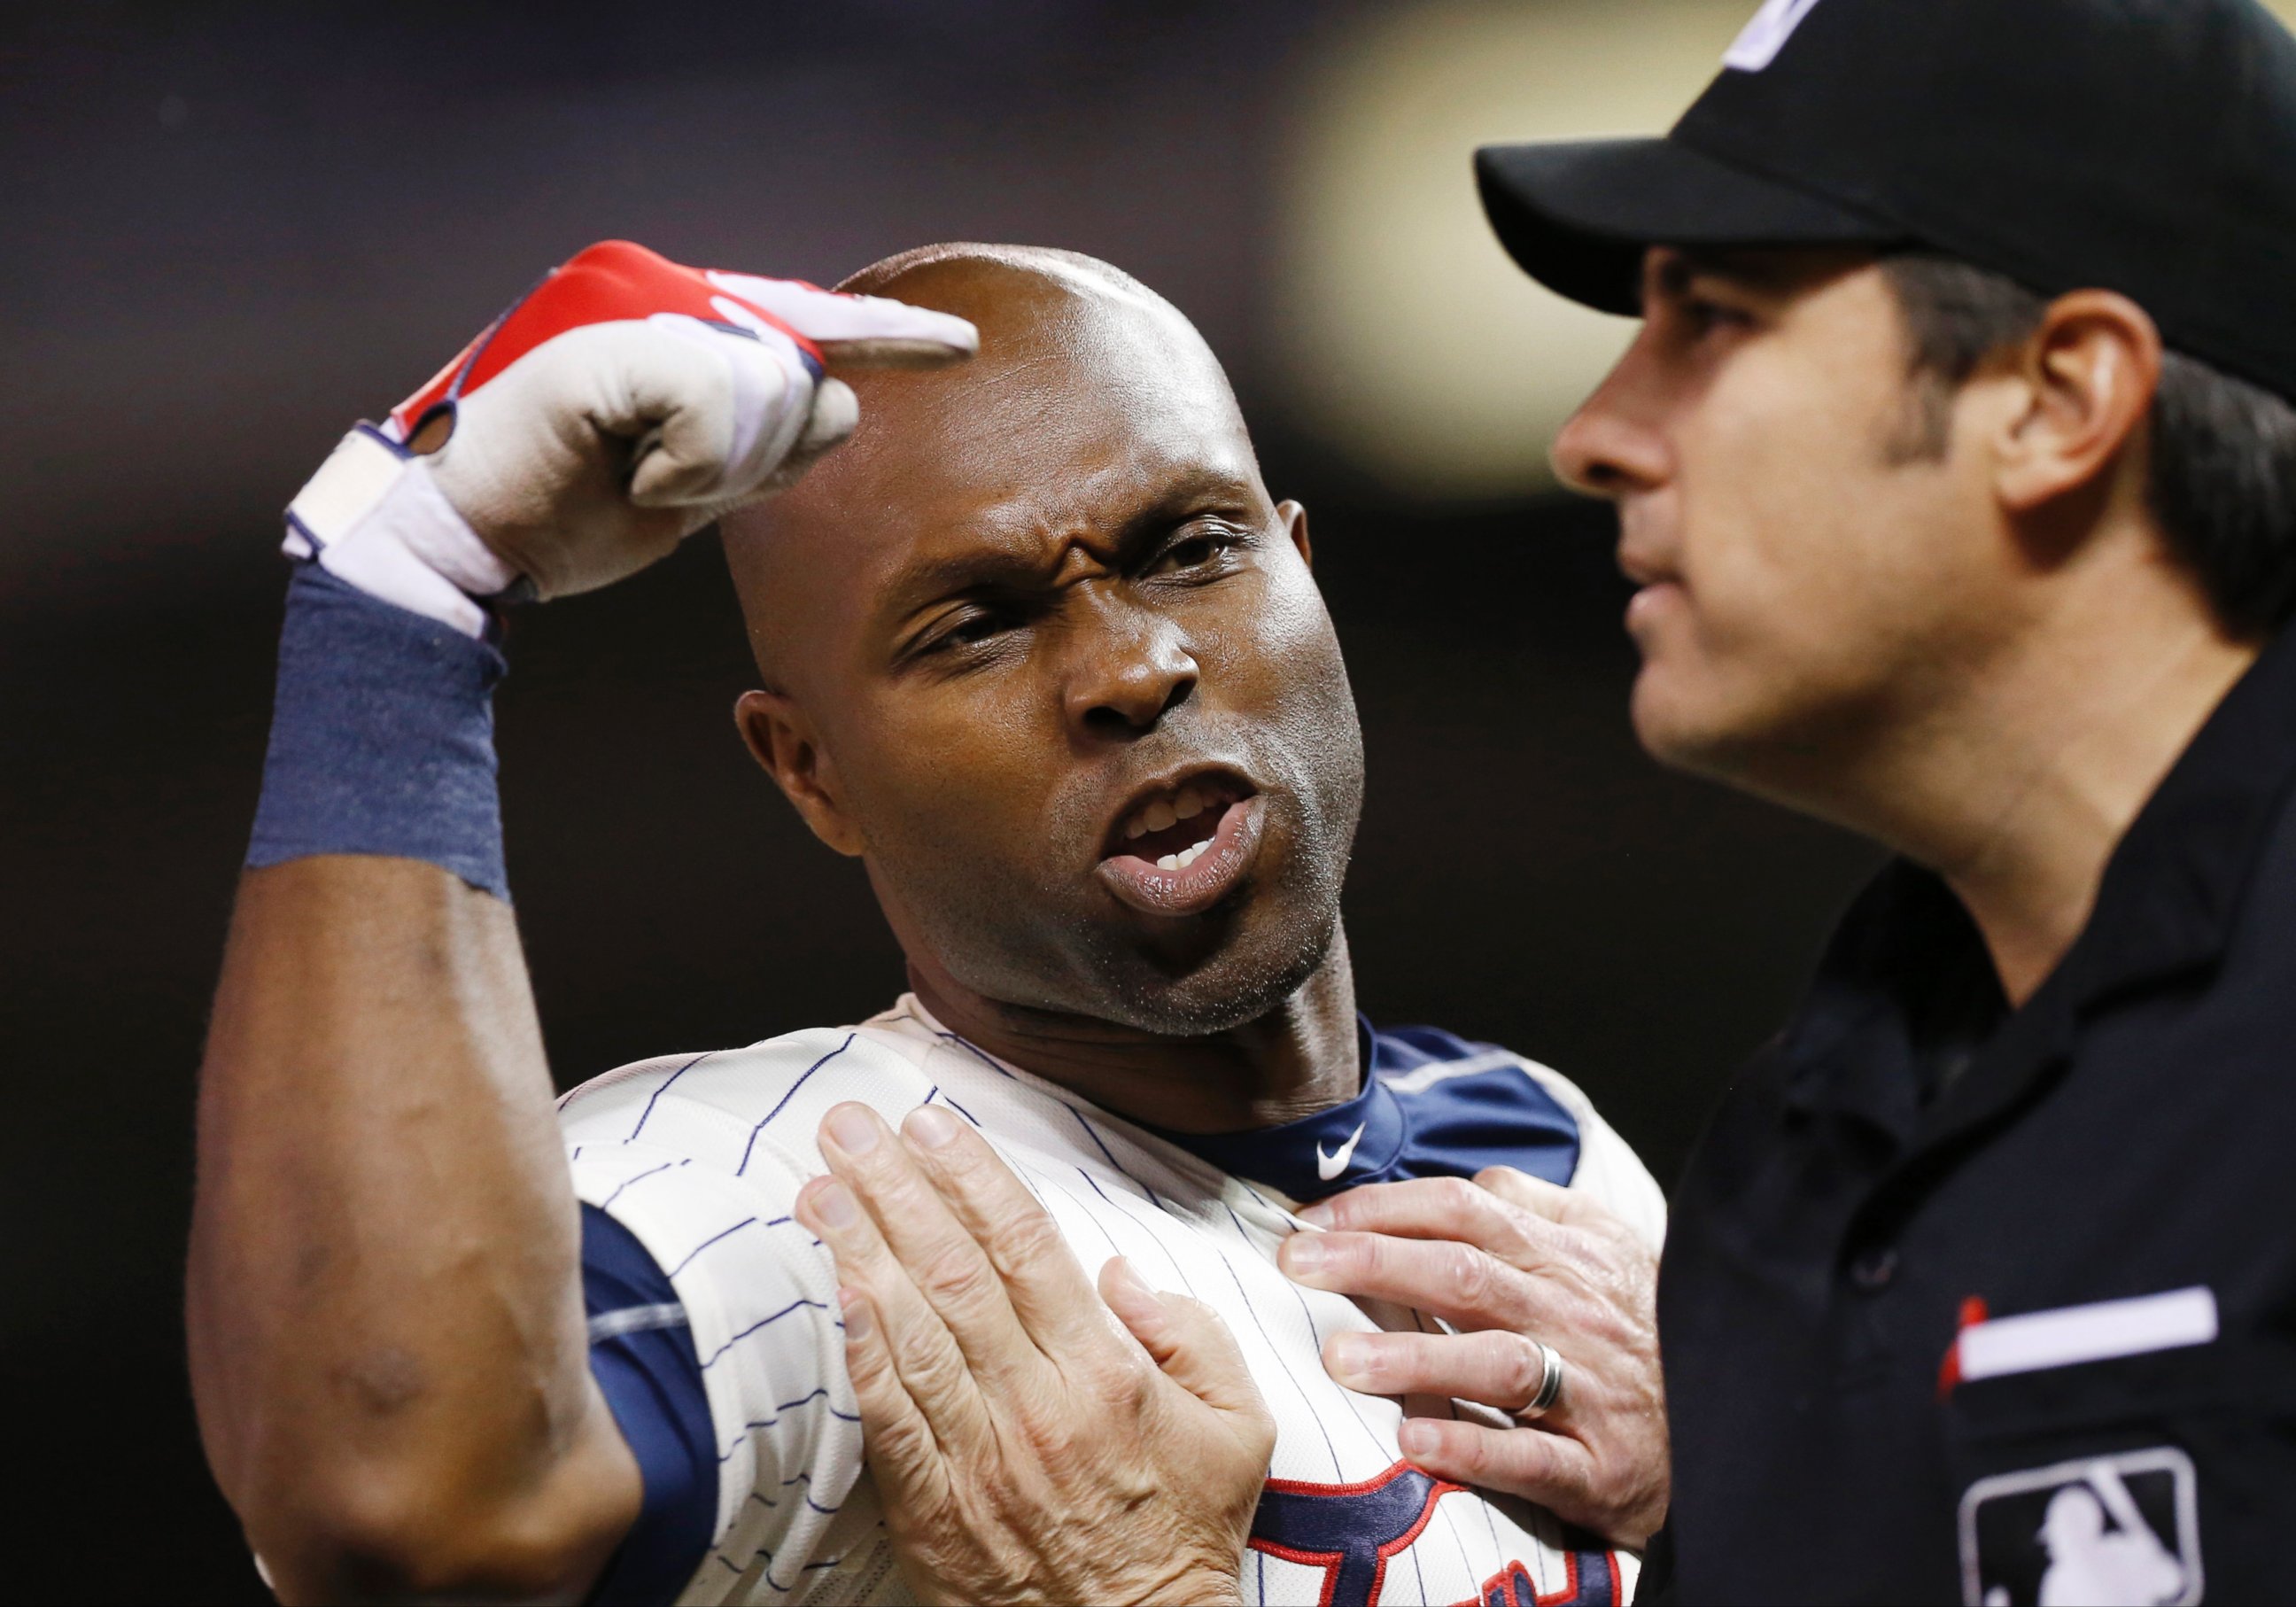 PHOTO: Umpire Jeff Kellogg restrains Minnesota Twins? Torii Hunter, left, who argues a call third strike after he was ejected by plate umpire Mark Ripperger during the eighth inning of a baseball game, June 10, 2015, in Minneapolis.